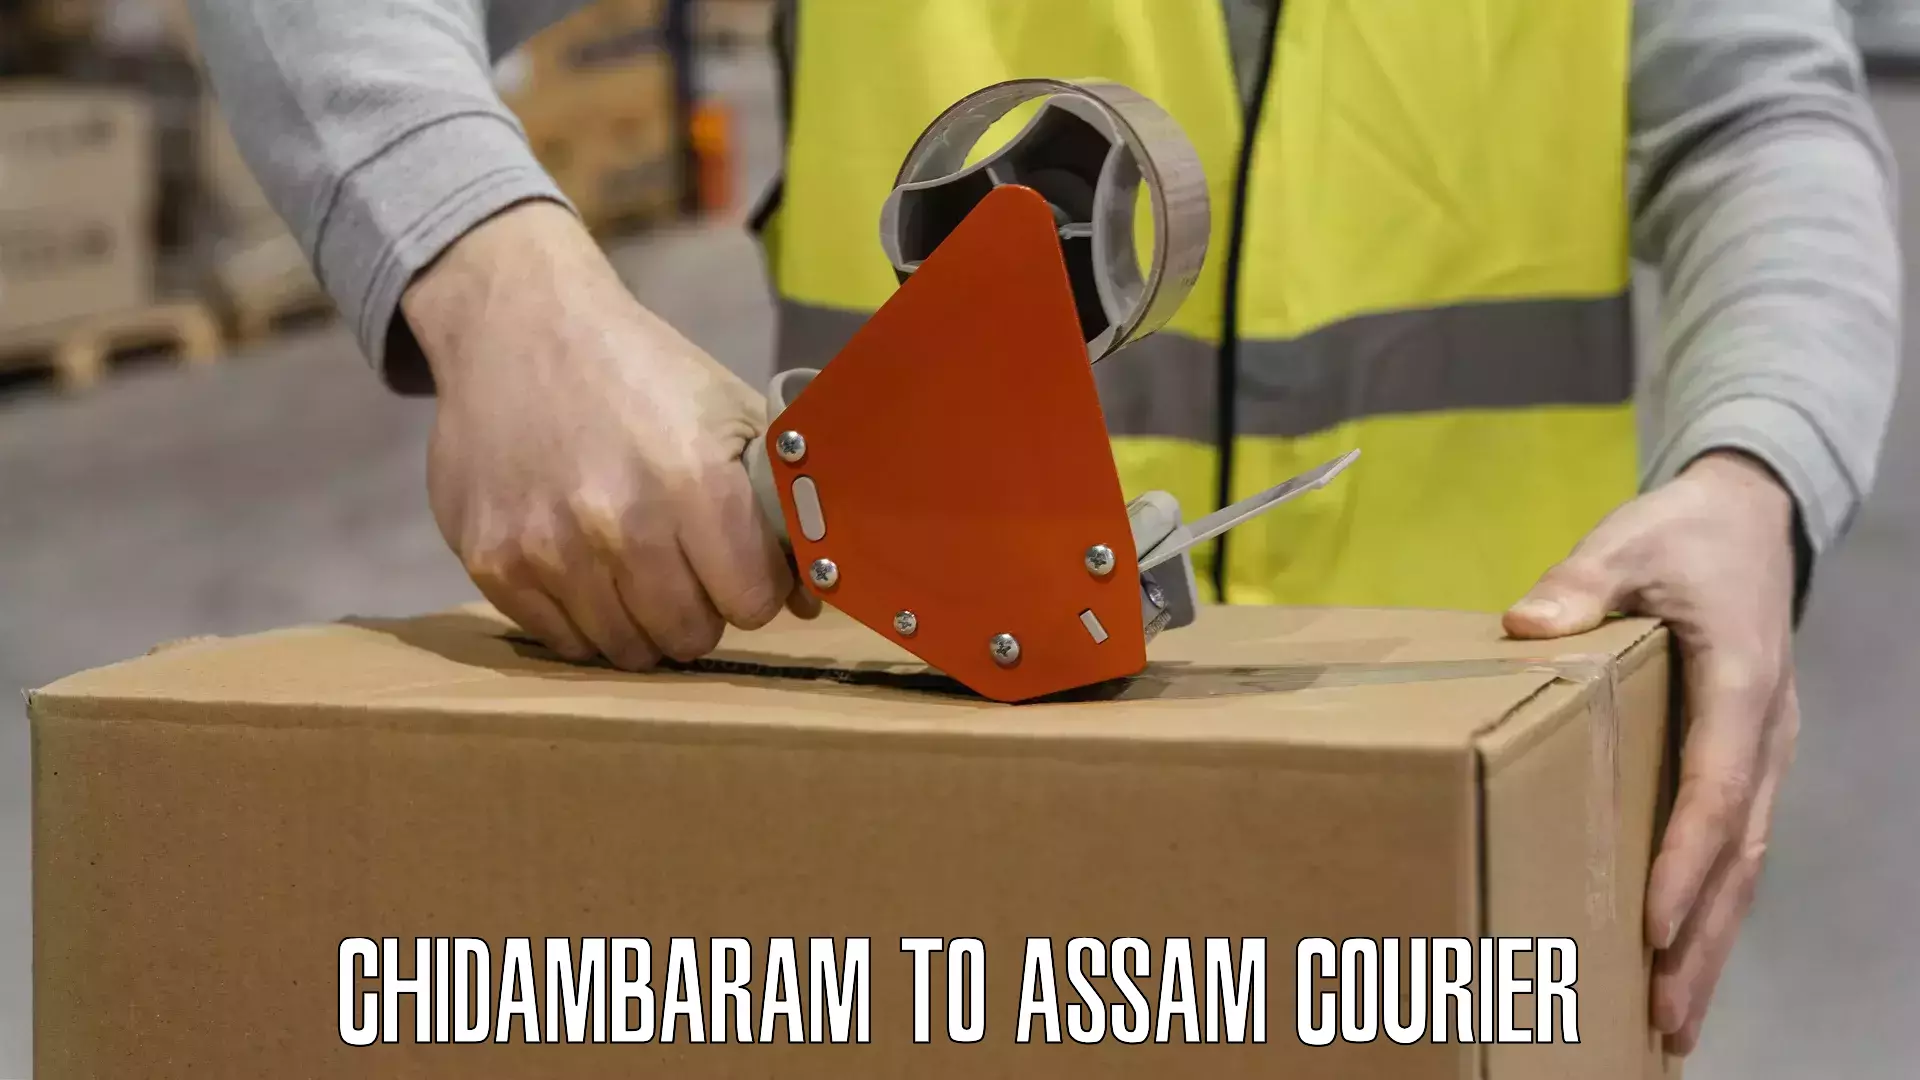 Enhanced tracking features in Chidambaram to Assam